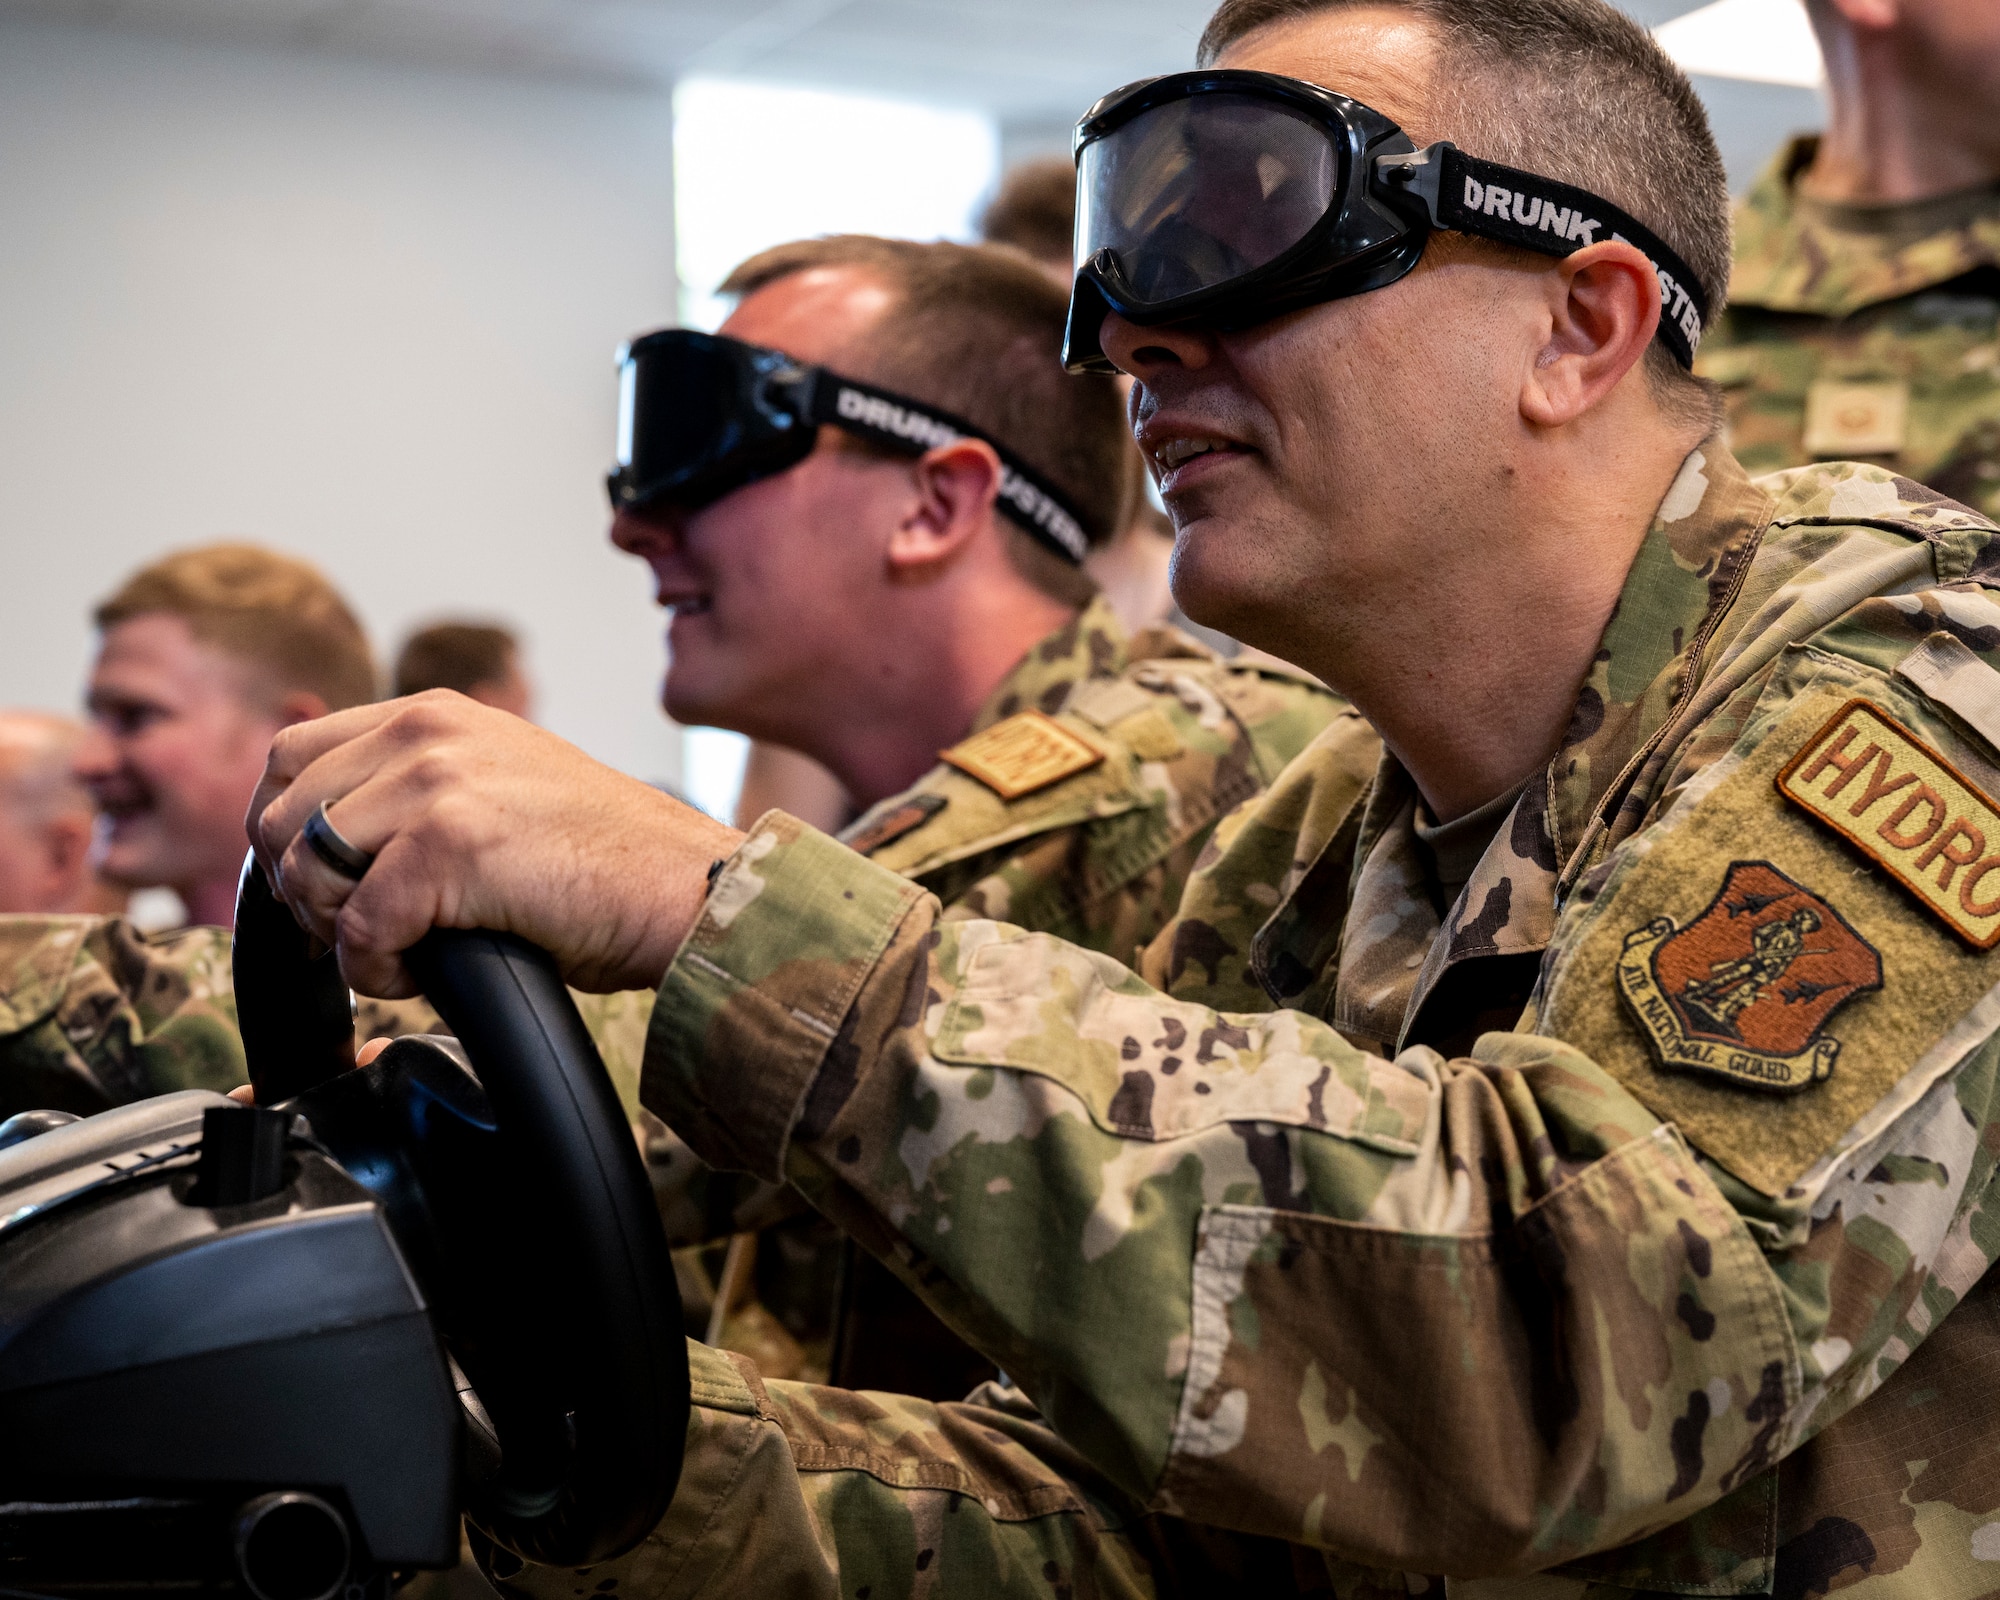 Airman wears drunk goggles and operates a video game vehicle